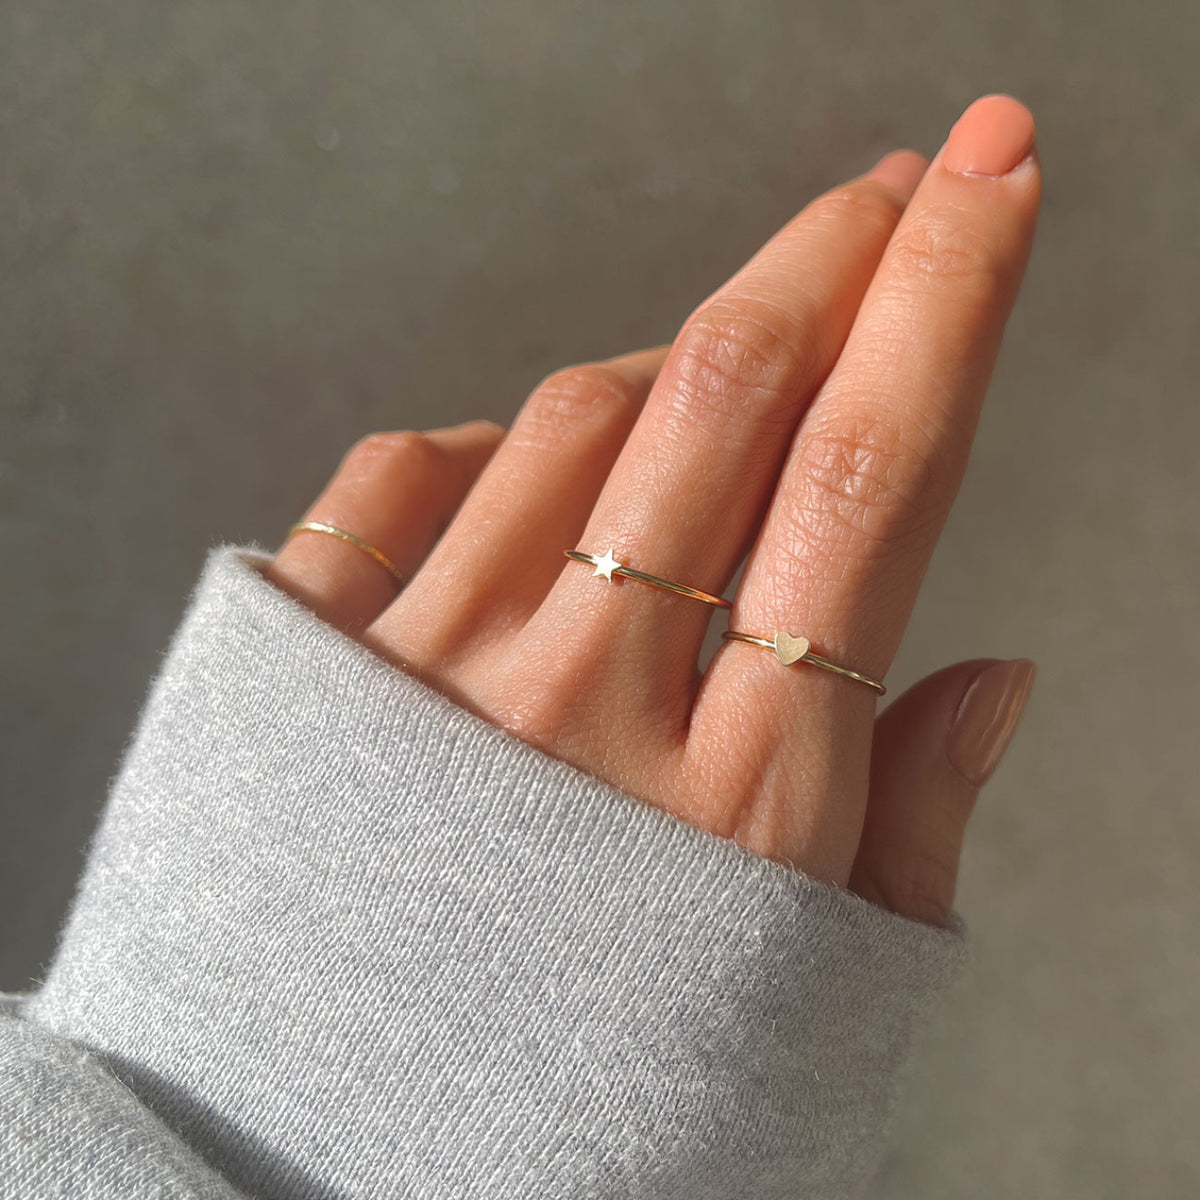 14K Gold Mini Star Ring, Minimal Stackable Ring, Celestial Jewelry, Constellation Ring, Birthday Gift, Simple Gold Ring, Rose Gold